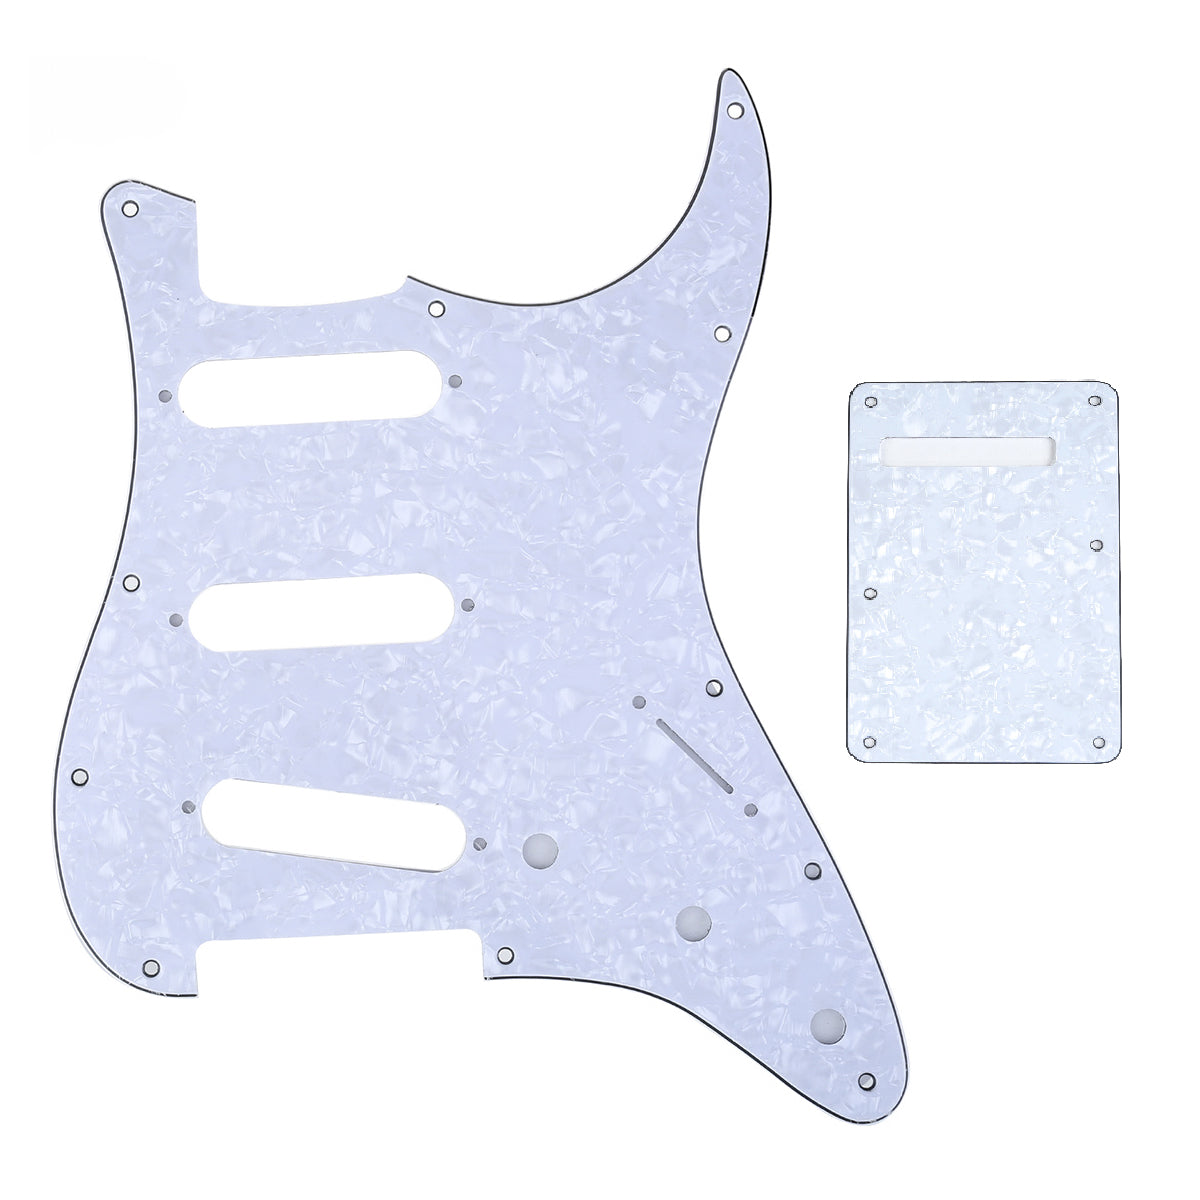 Musiclily SSS 11 Hole Strat Guitar Pickguard and BackPlate Set for Fender USA/Mexican Standard Stratocaster Modern Style, 4Ply White Pearl